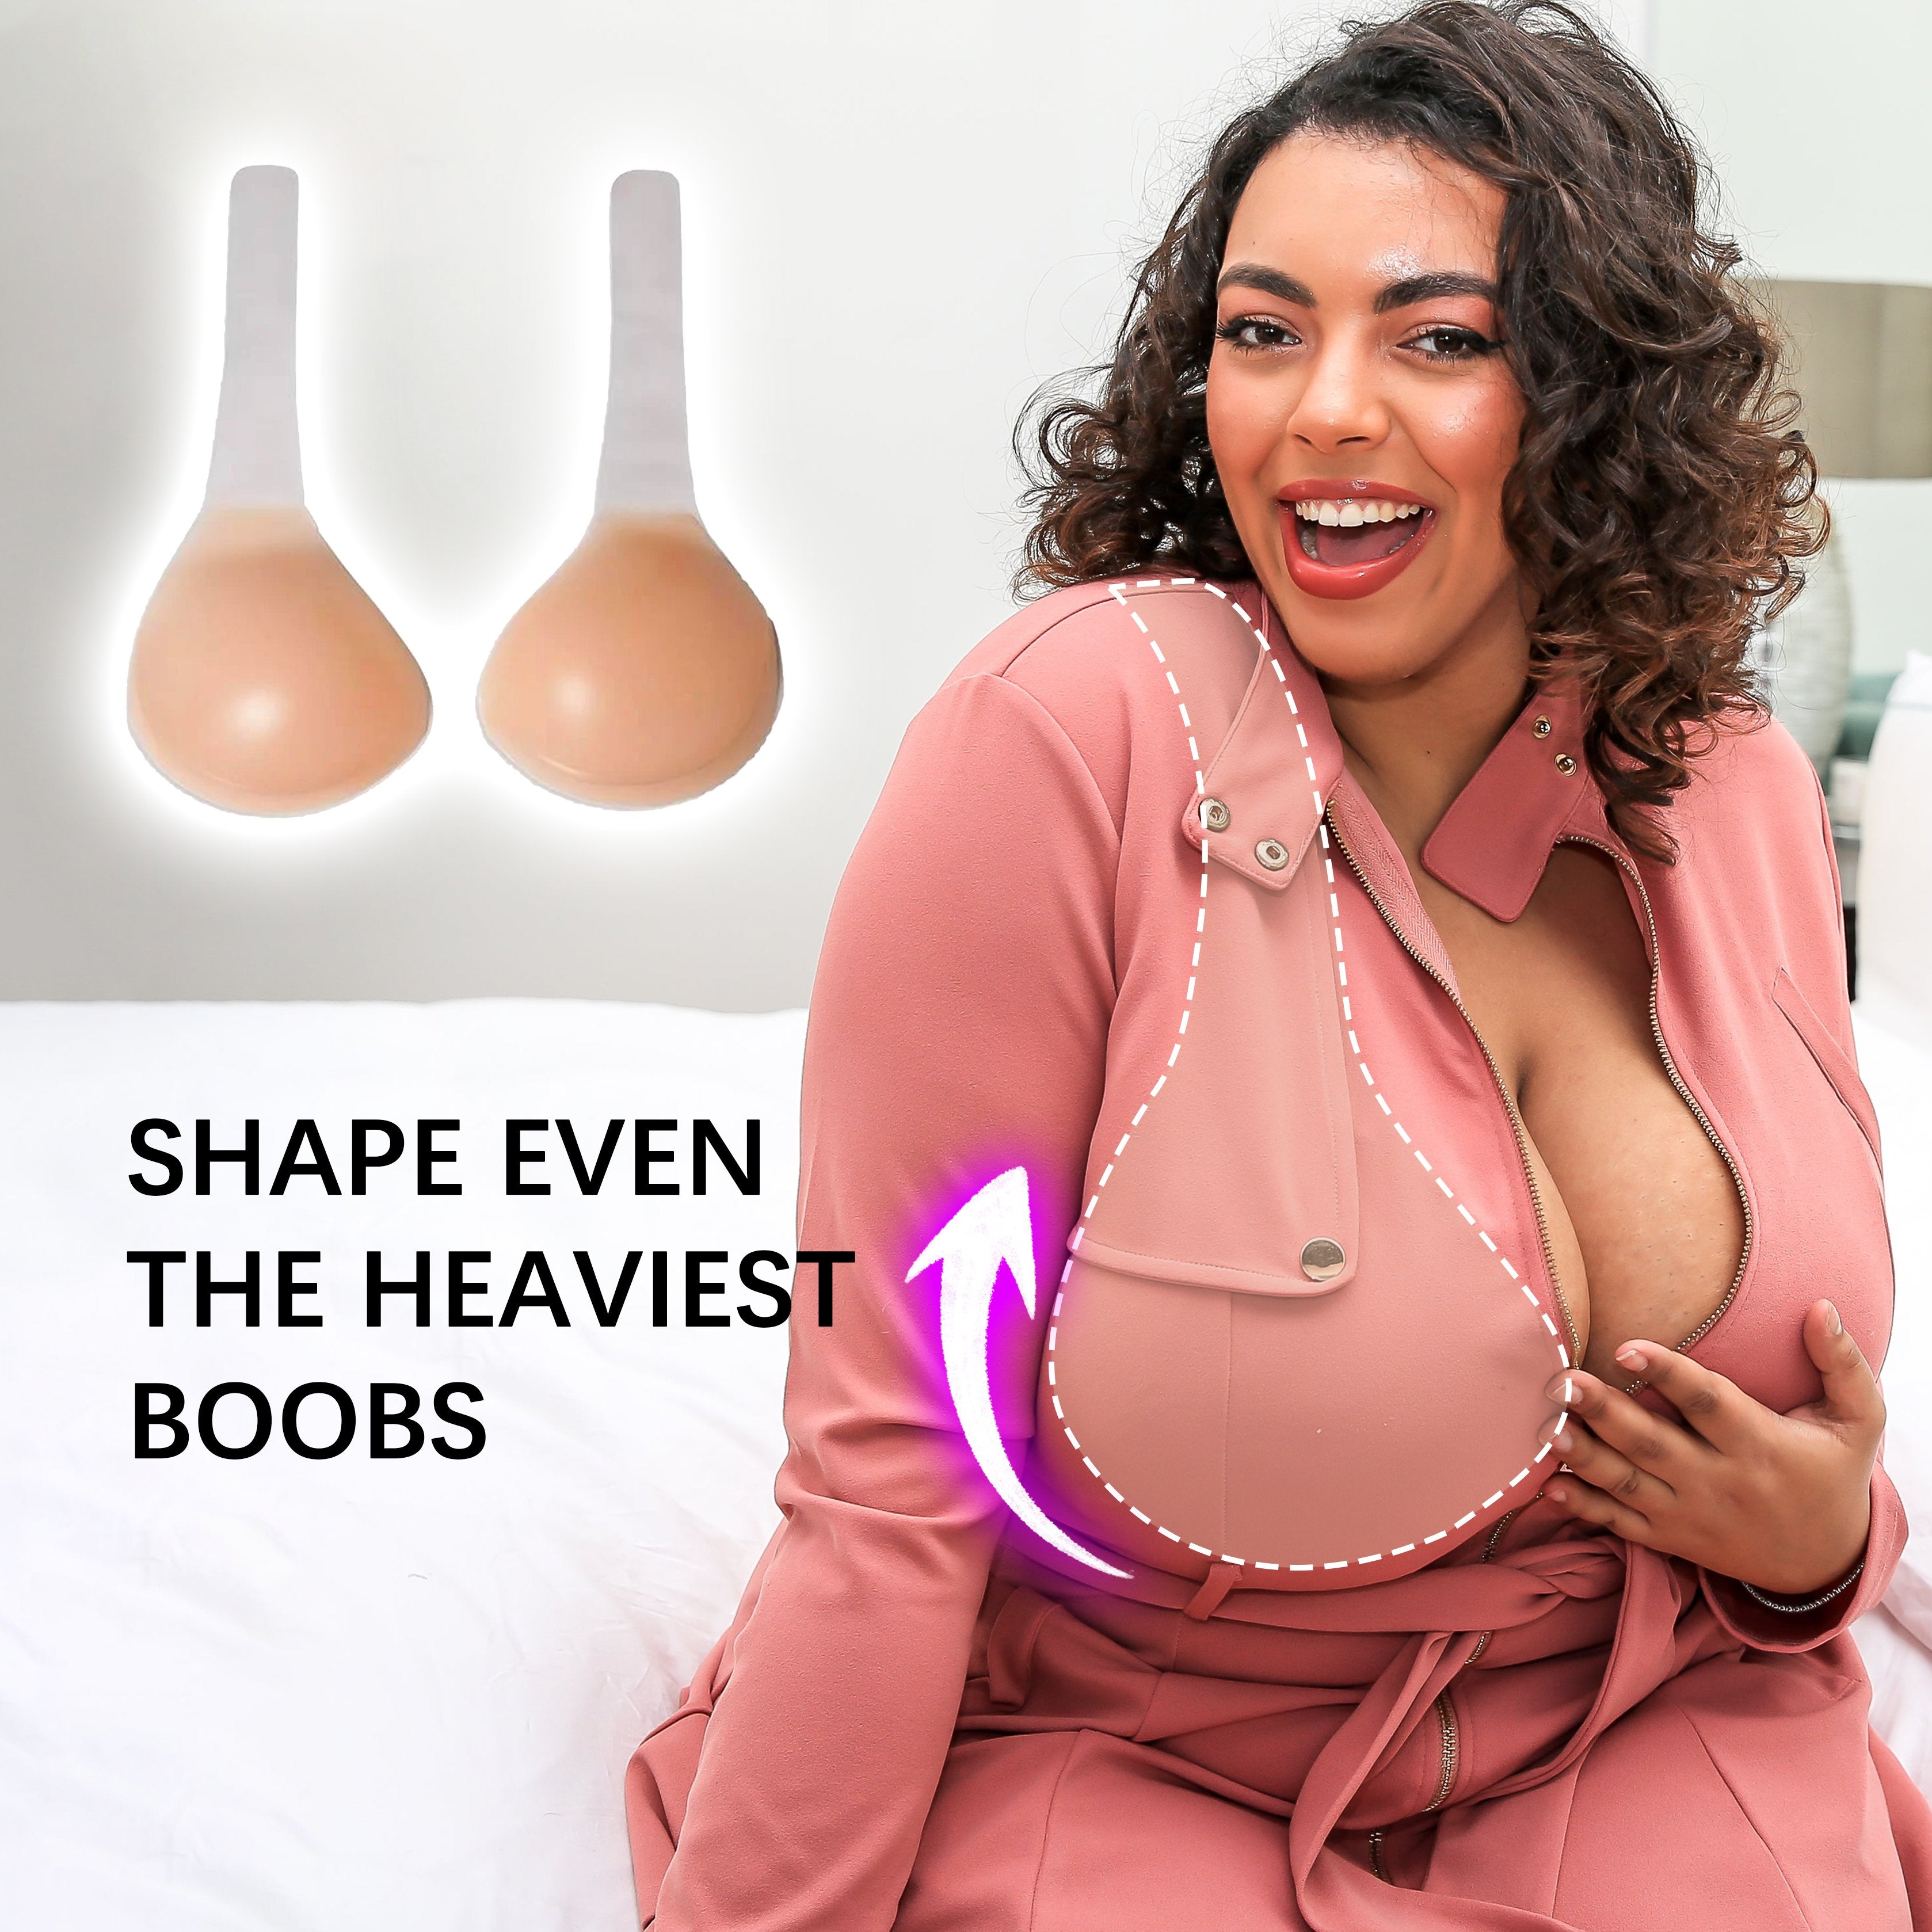 Voluptuous Silicone Lift by FashionForms – My Bare Essentials